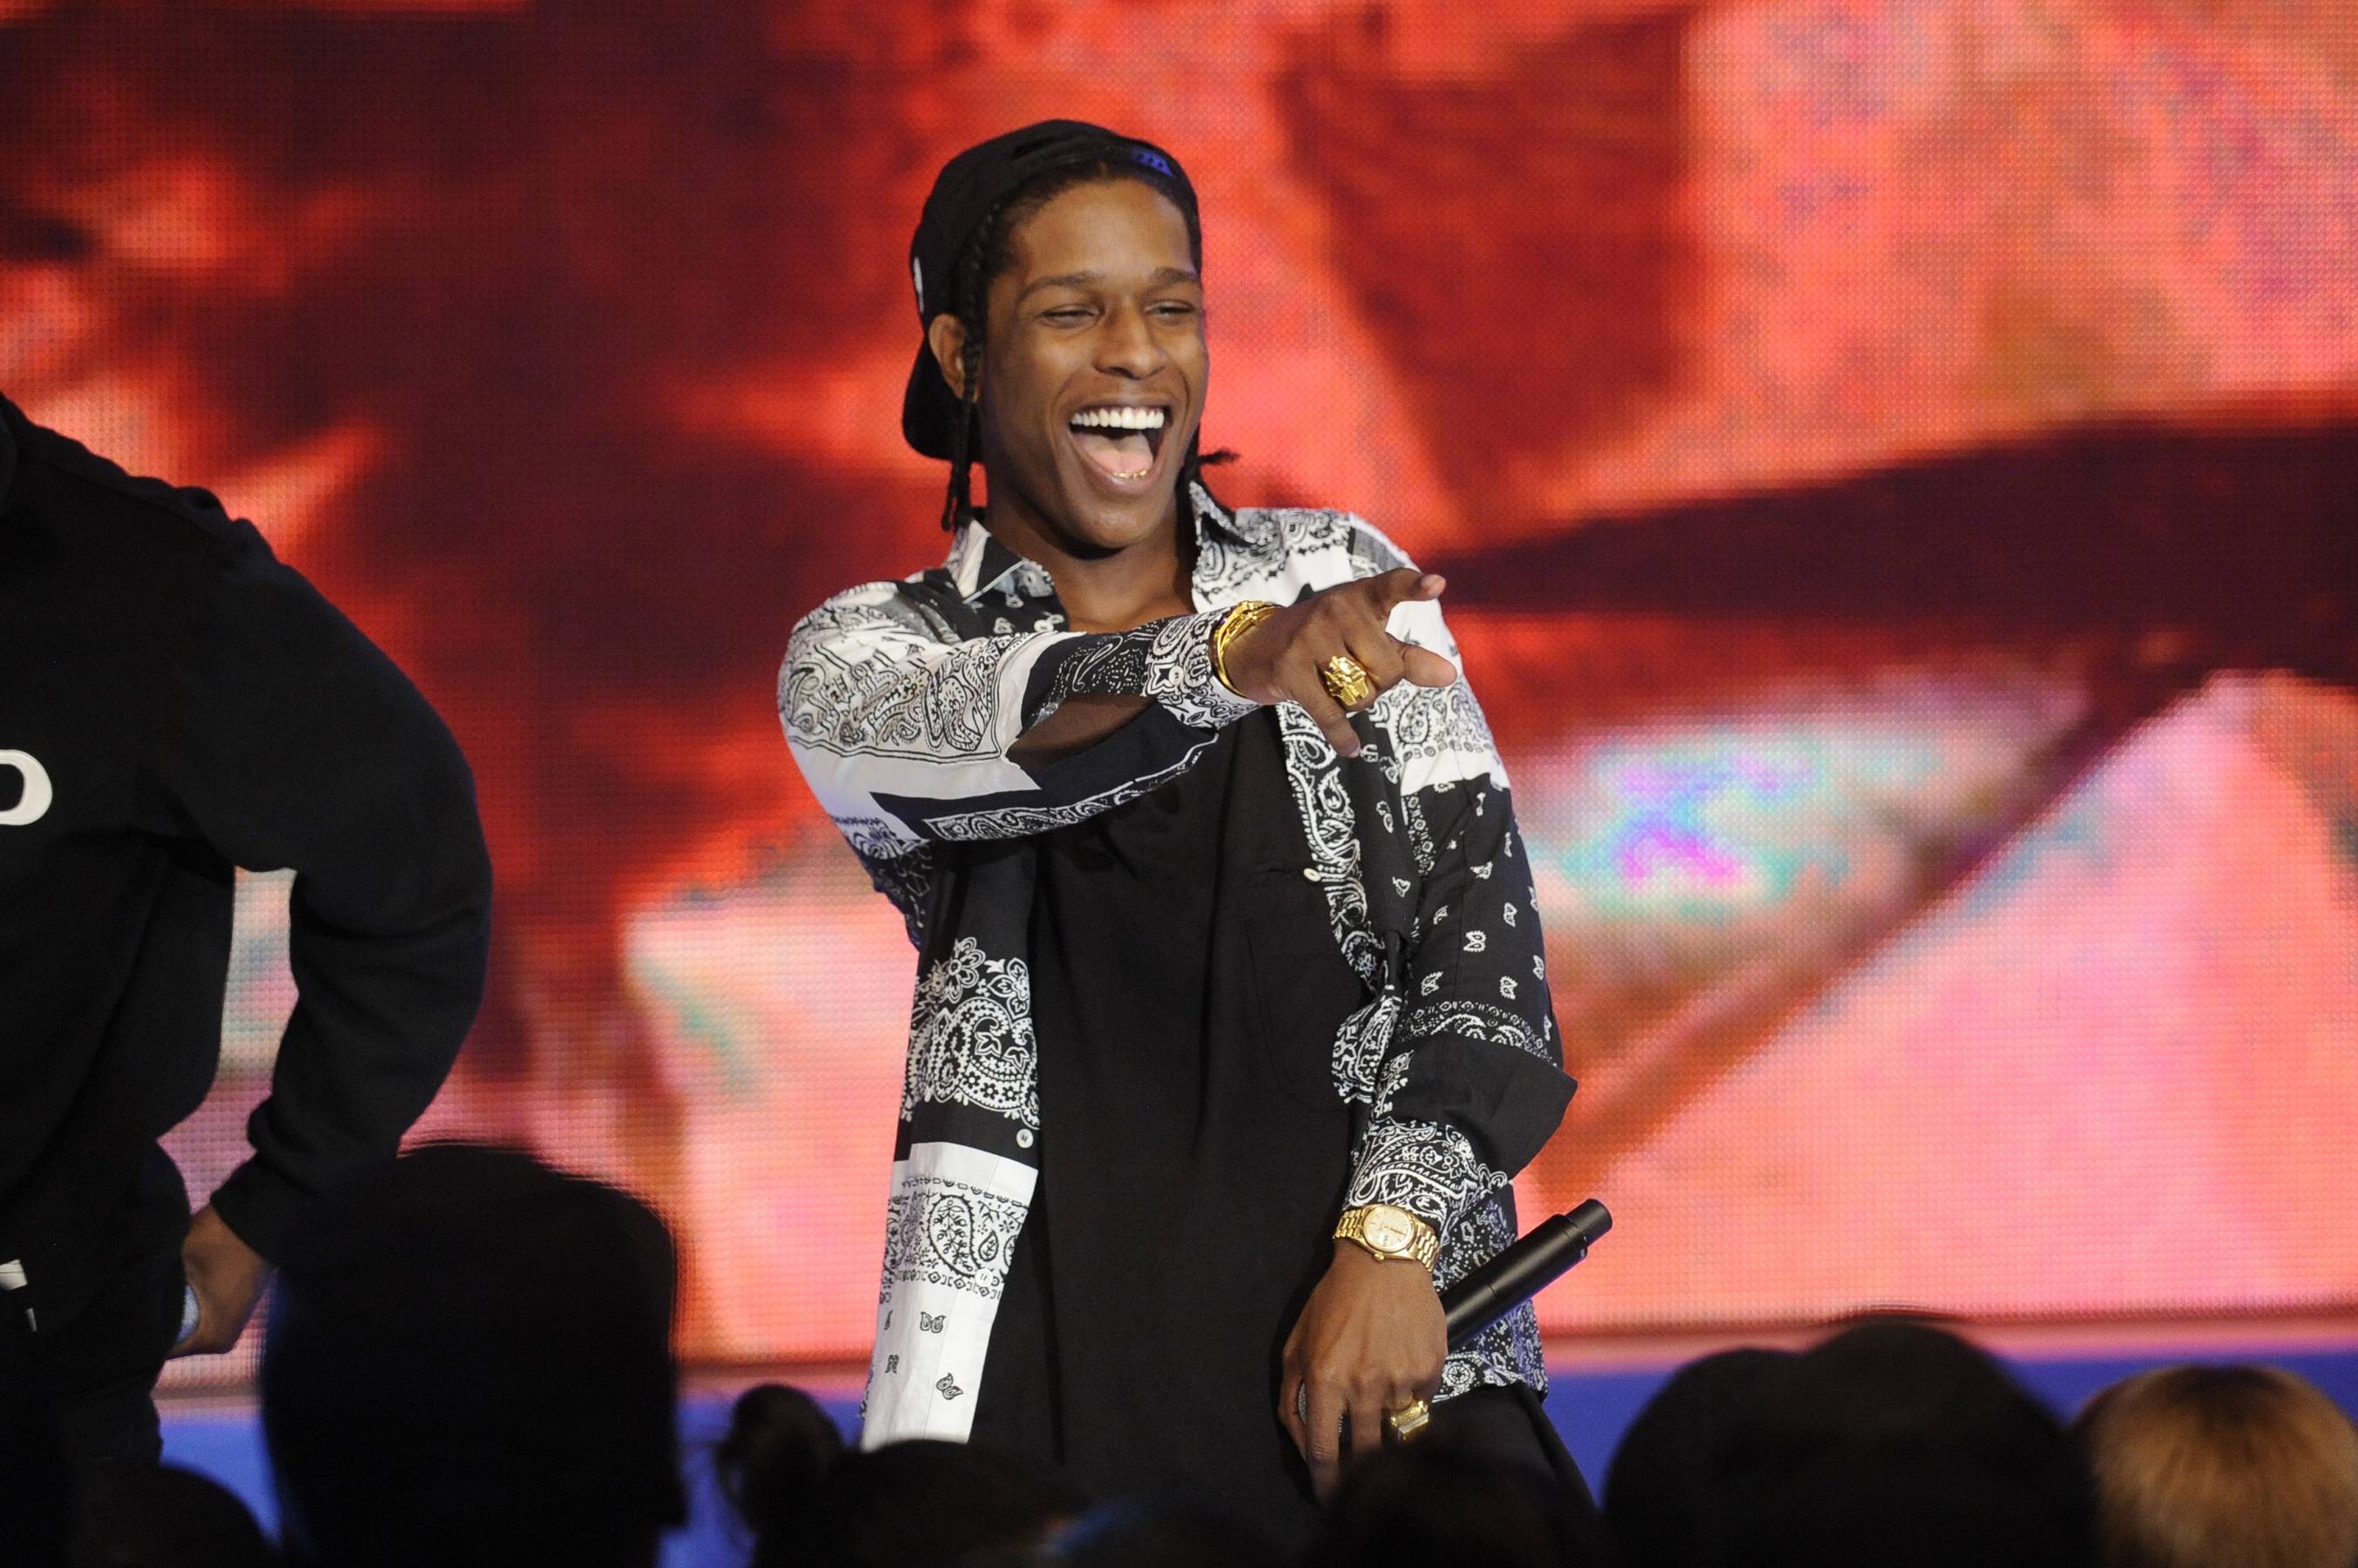 A$AP Rocky's Flyest 'Fits - Image 1 from A$AP Rocky's Flyest 'Fits